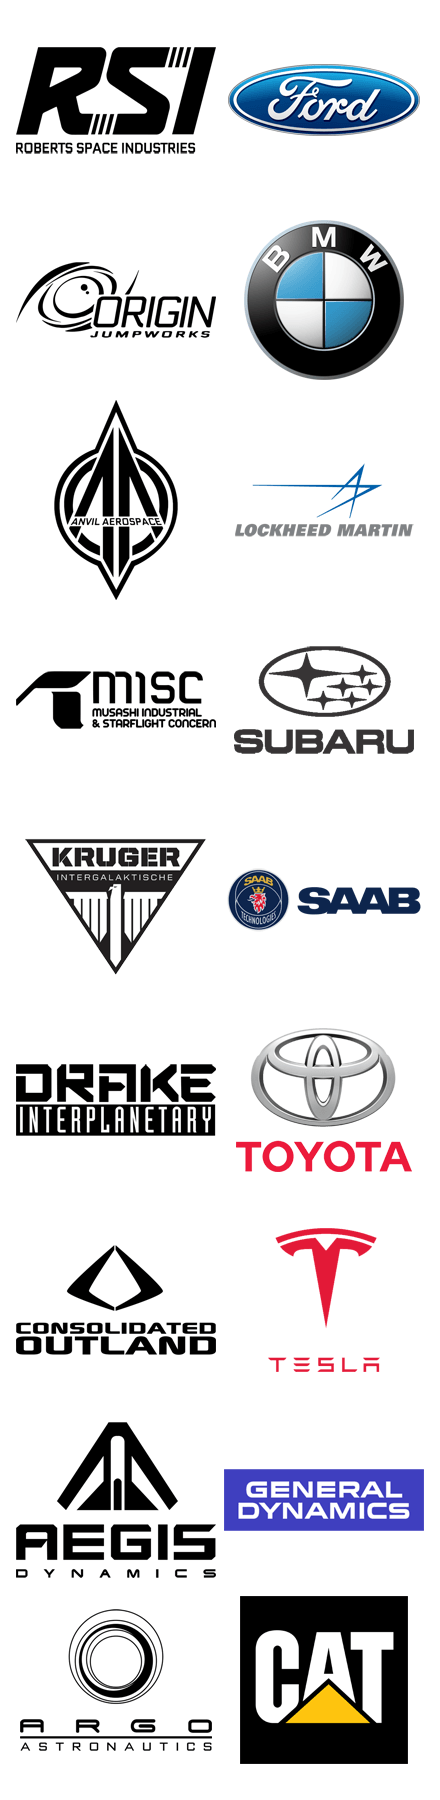 Vehicle Manufacturer Logo - Vehicle Manufacturer Logos Next to Real-World Inspirations or ...